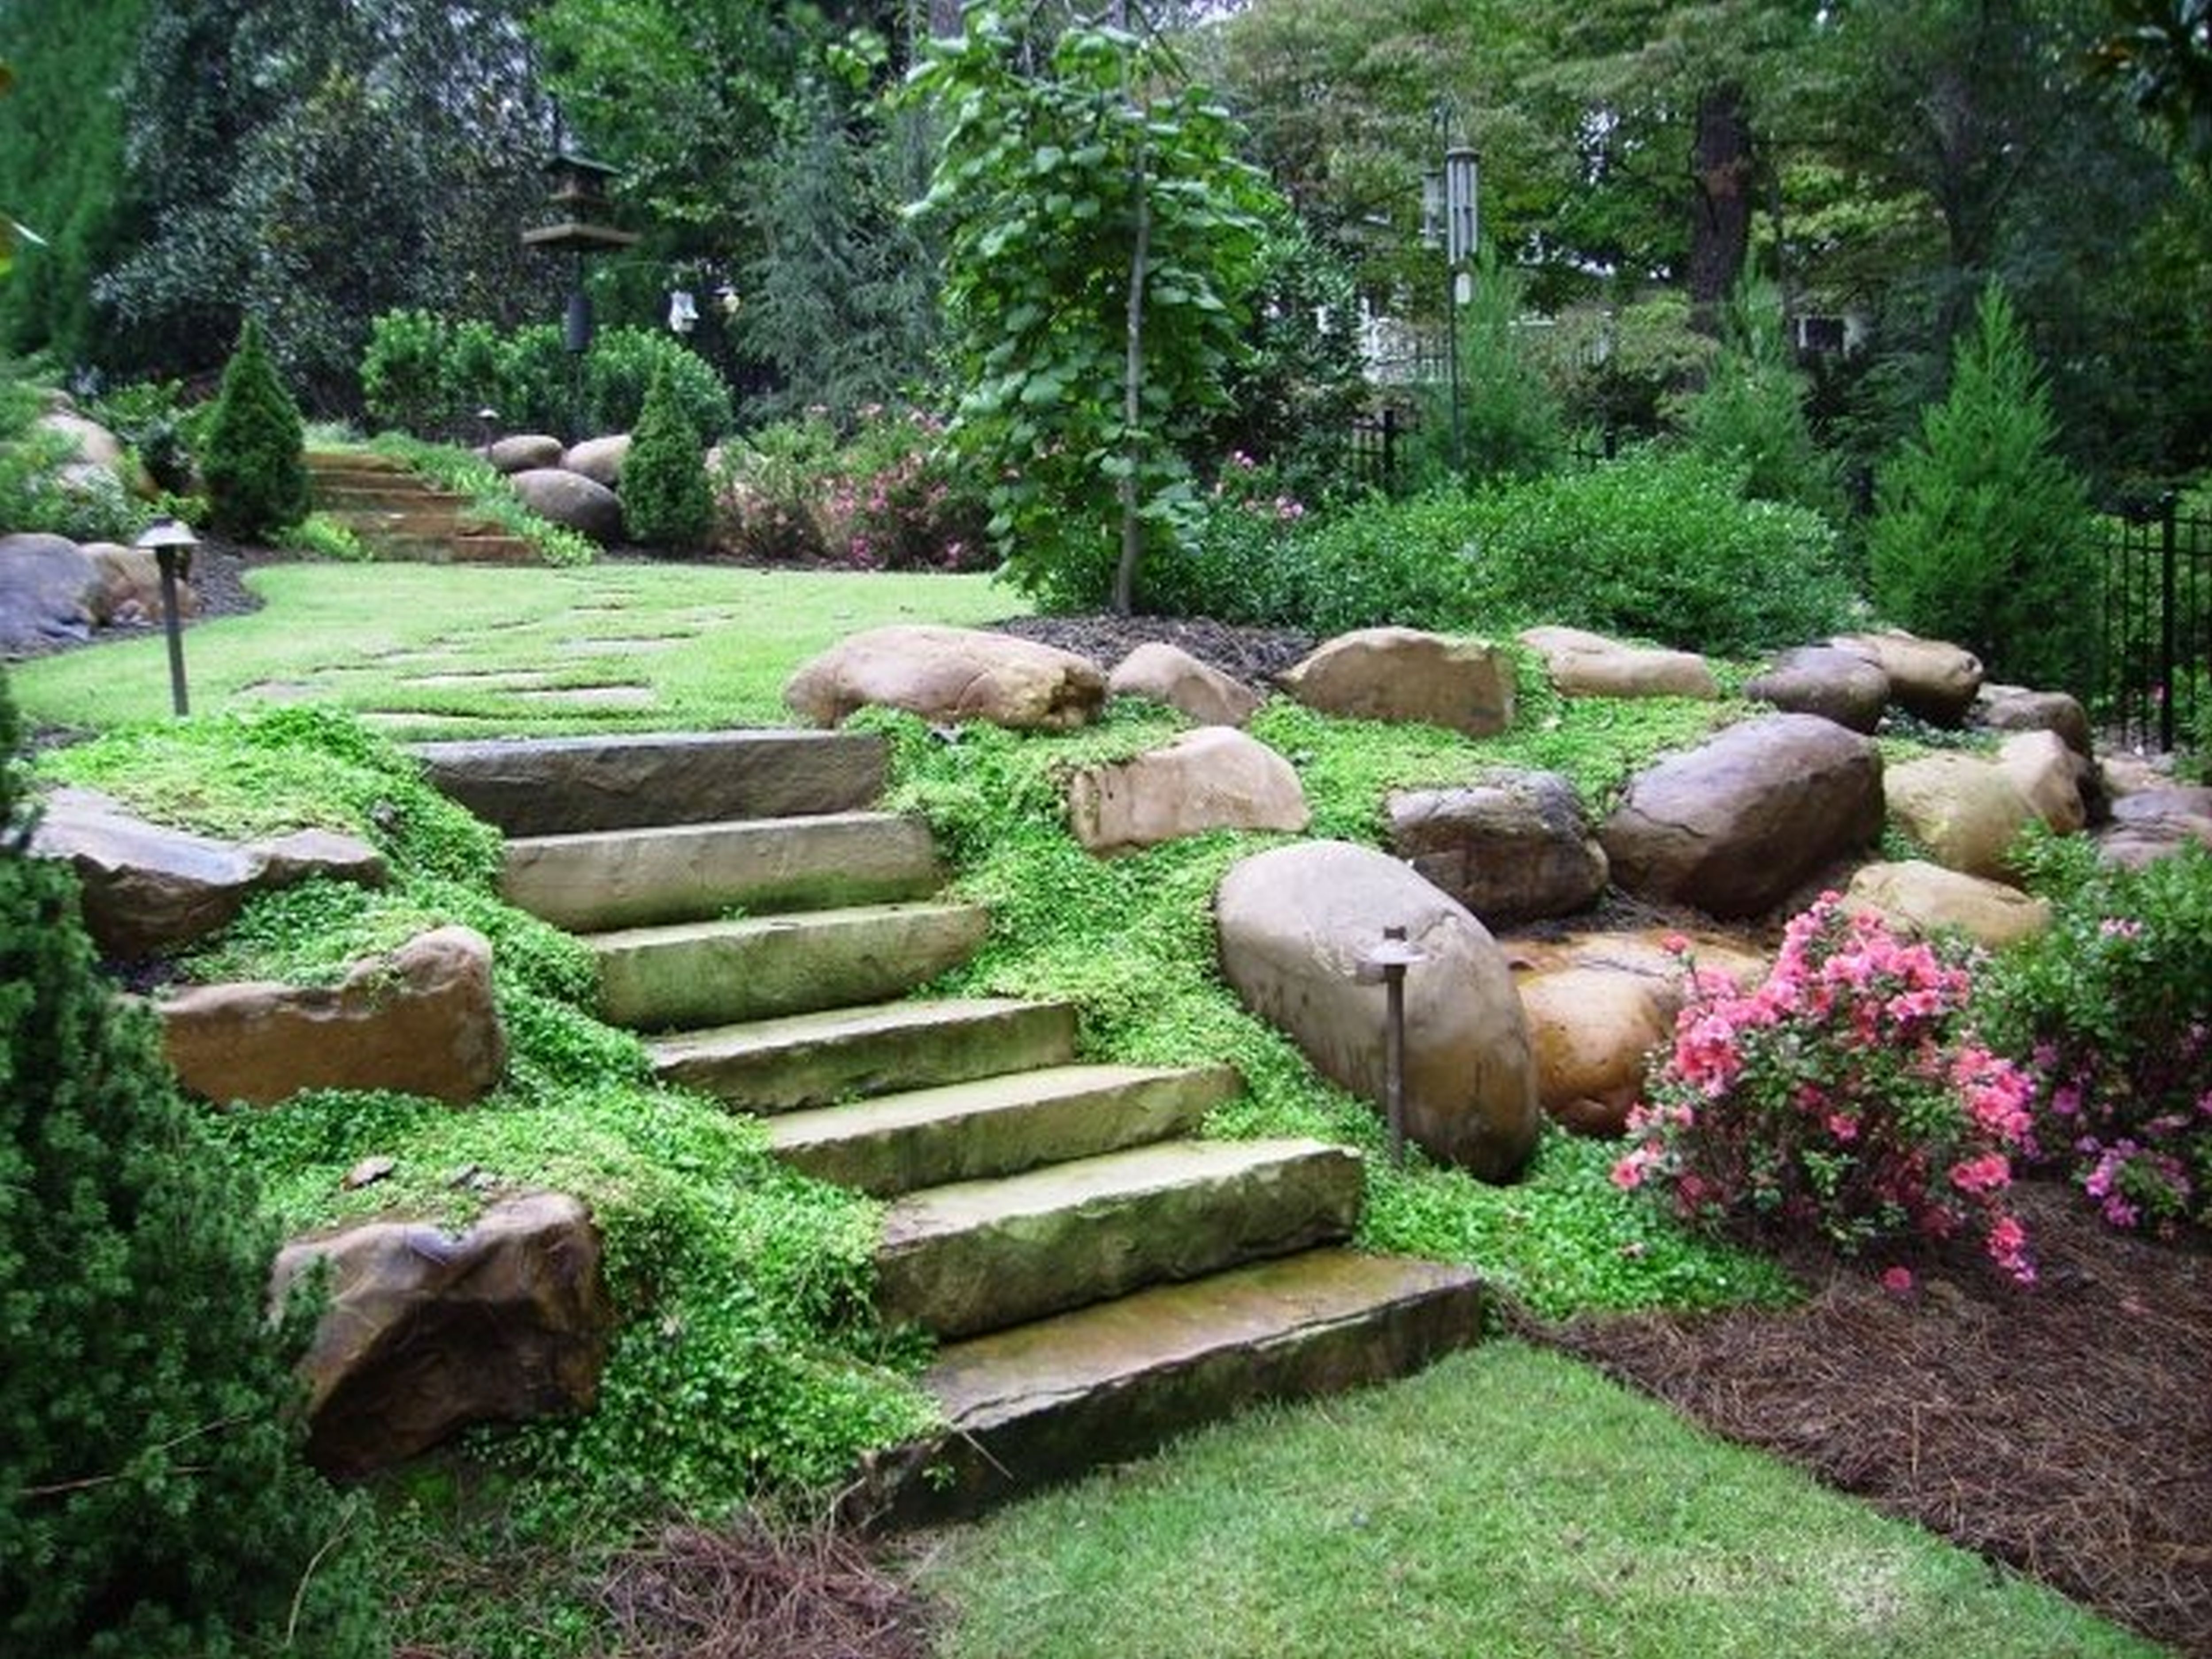 Outstanding Extraordinary Florida Landscaping Ideas You Need To Know